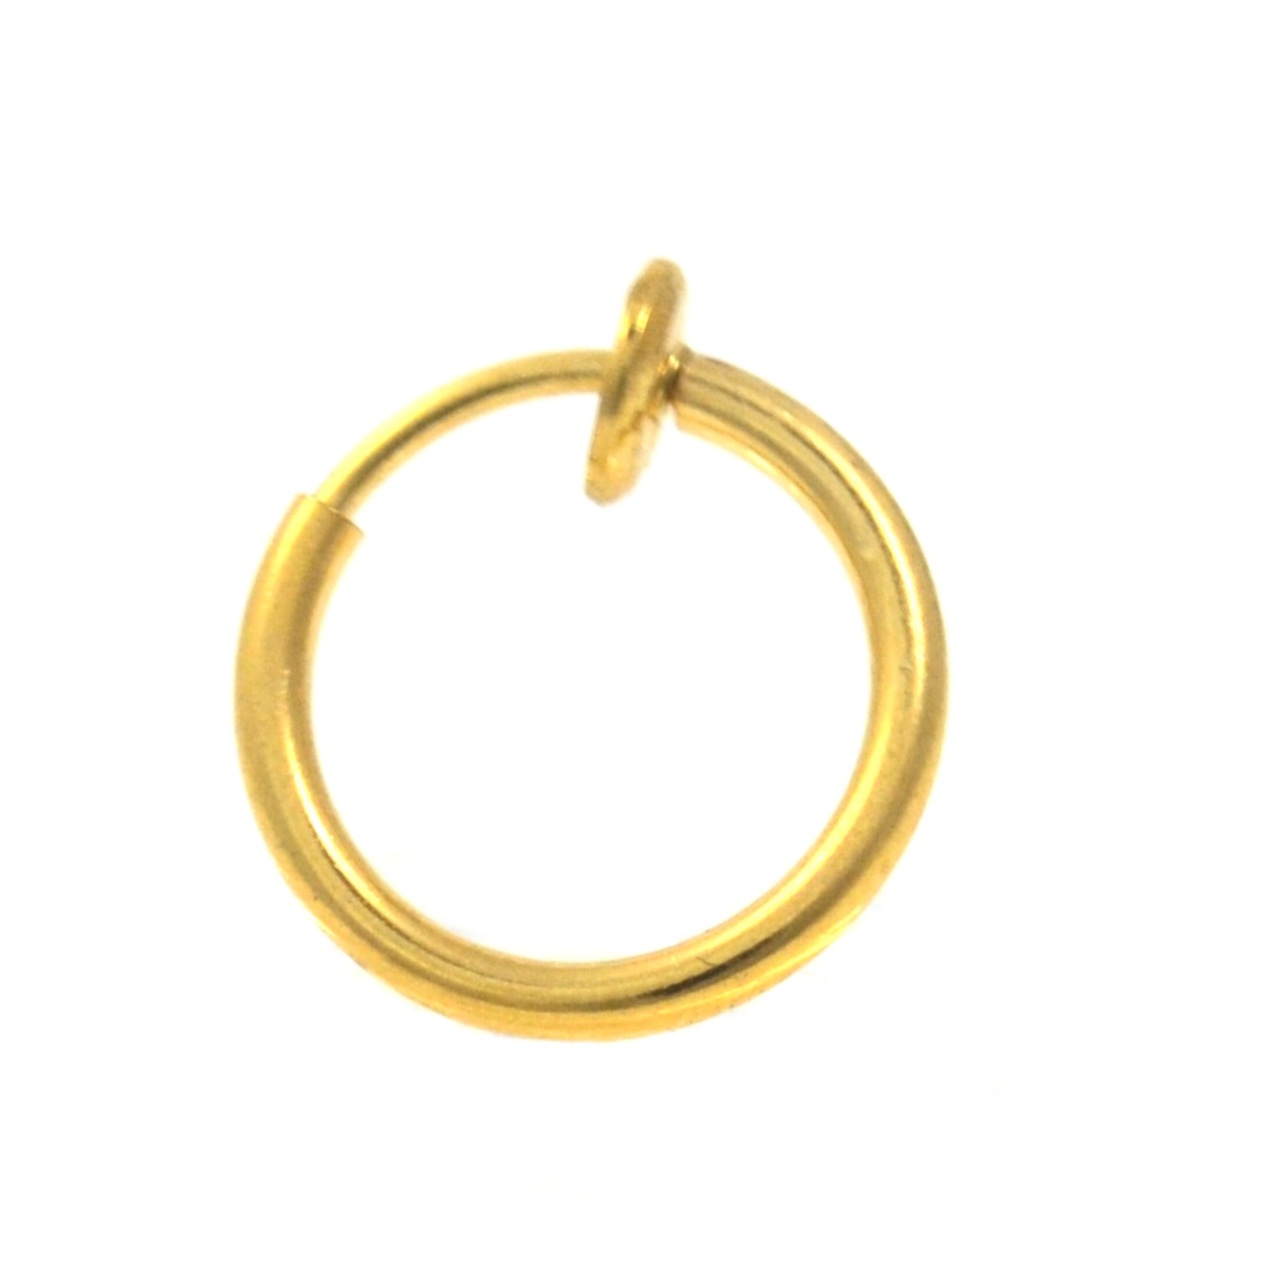 snap on fake septum ring gold plated 21187.1412596289